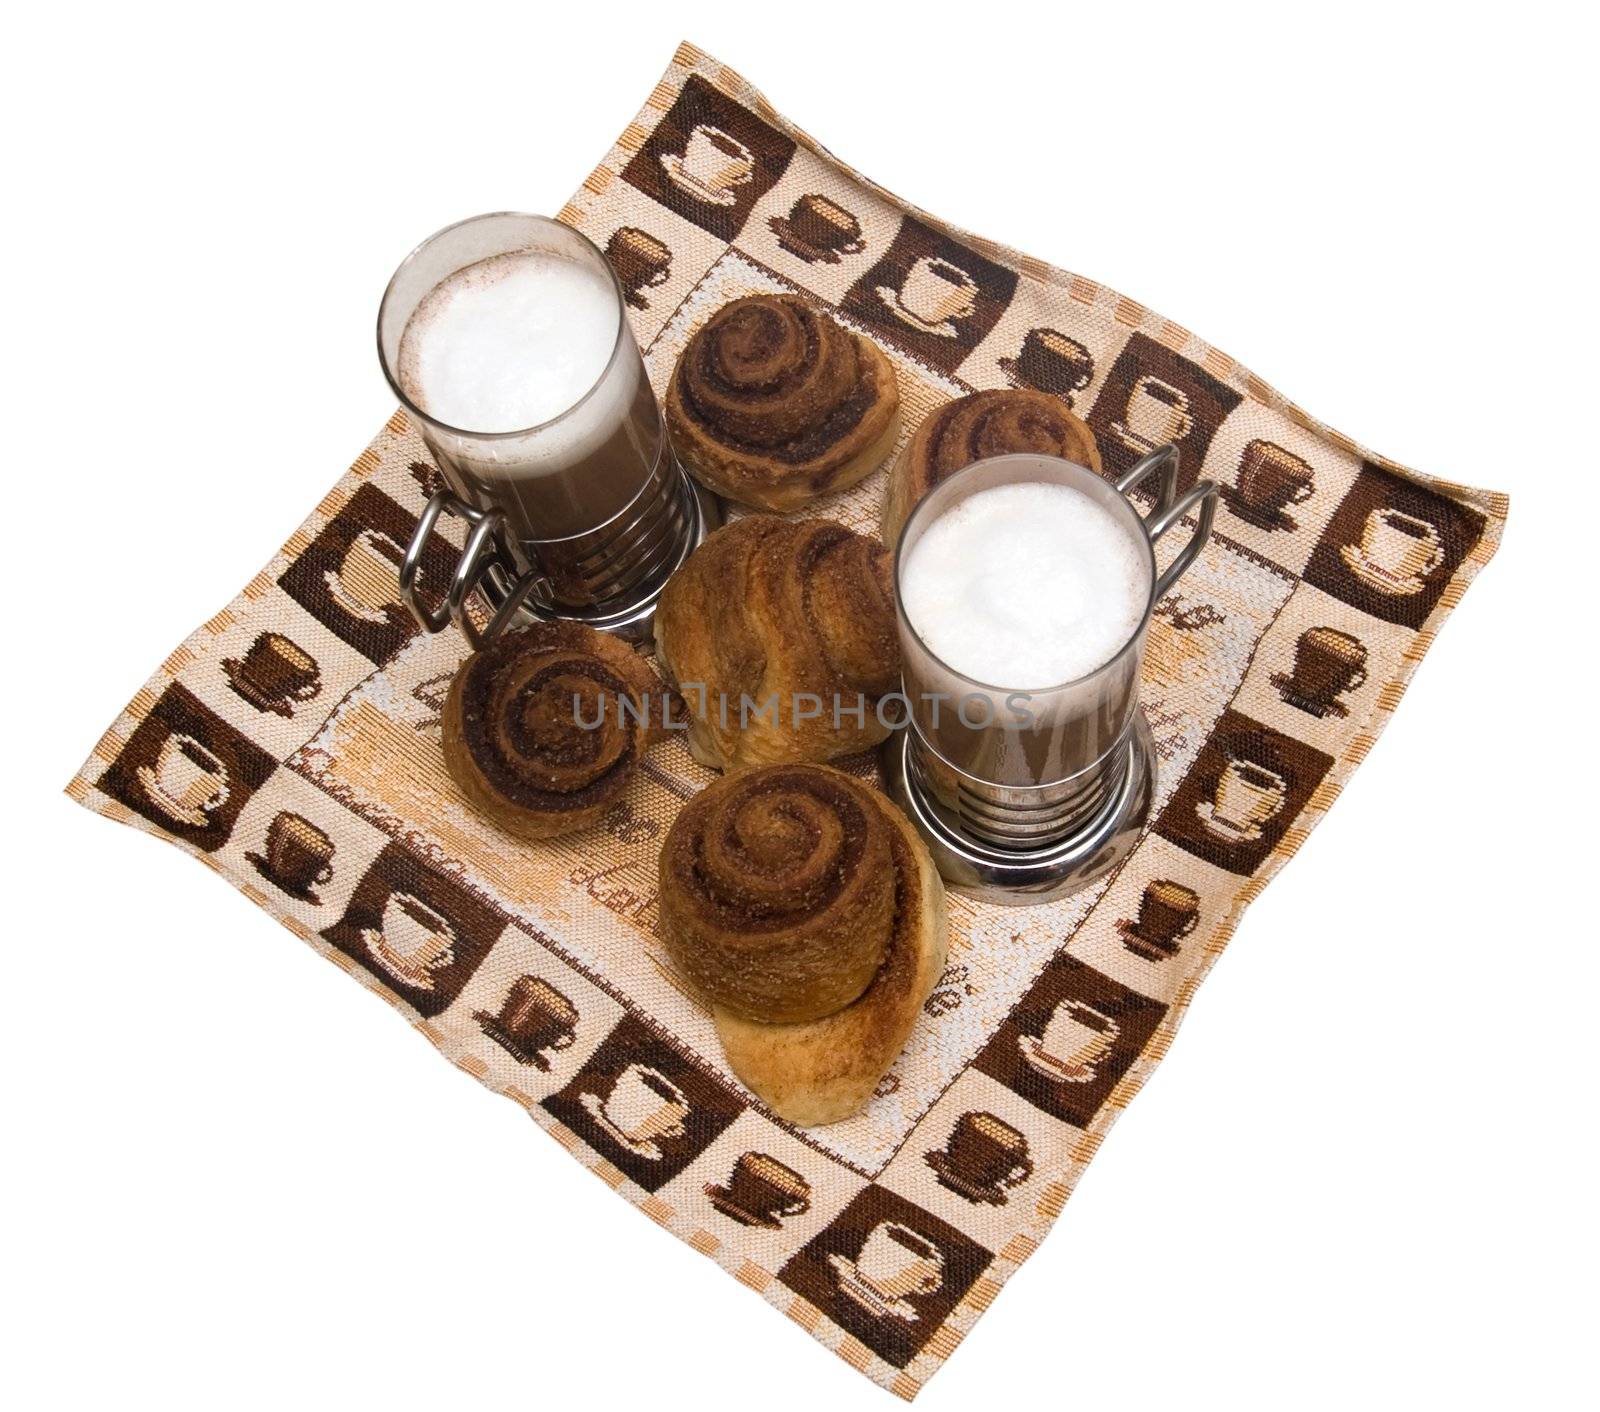 Home-made cinnamon snail bakery with latte by lilsla